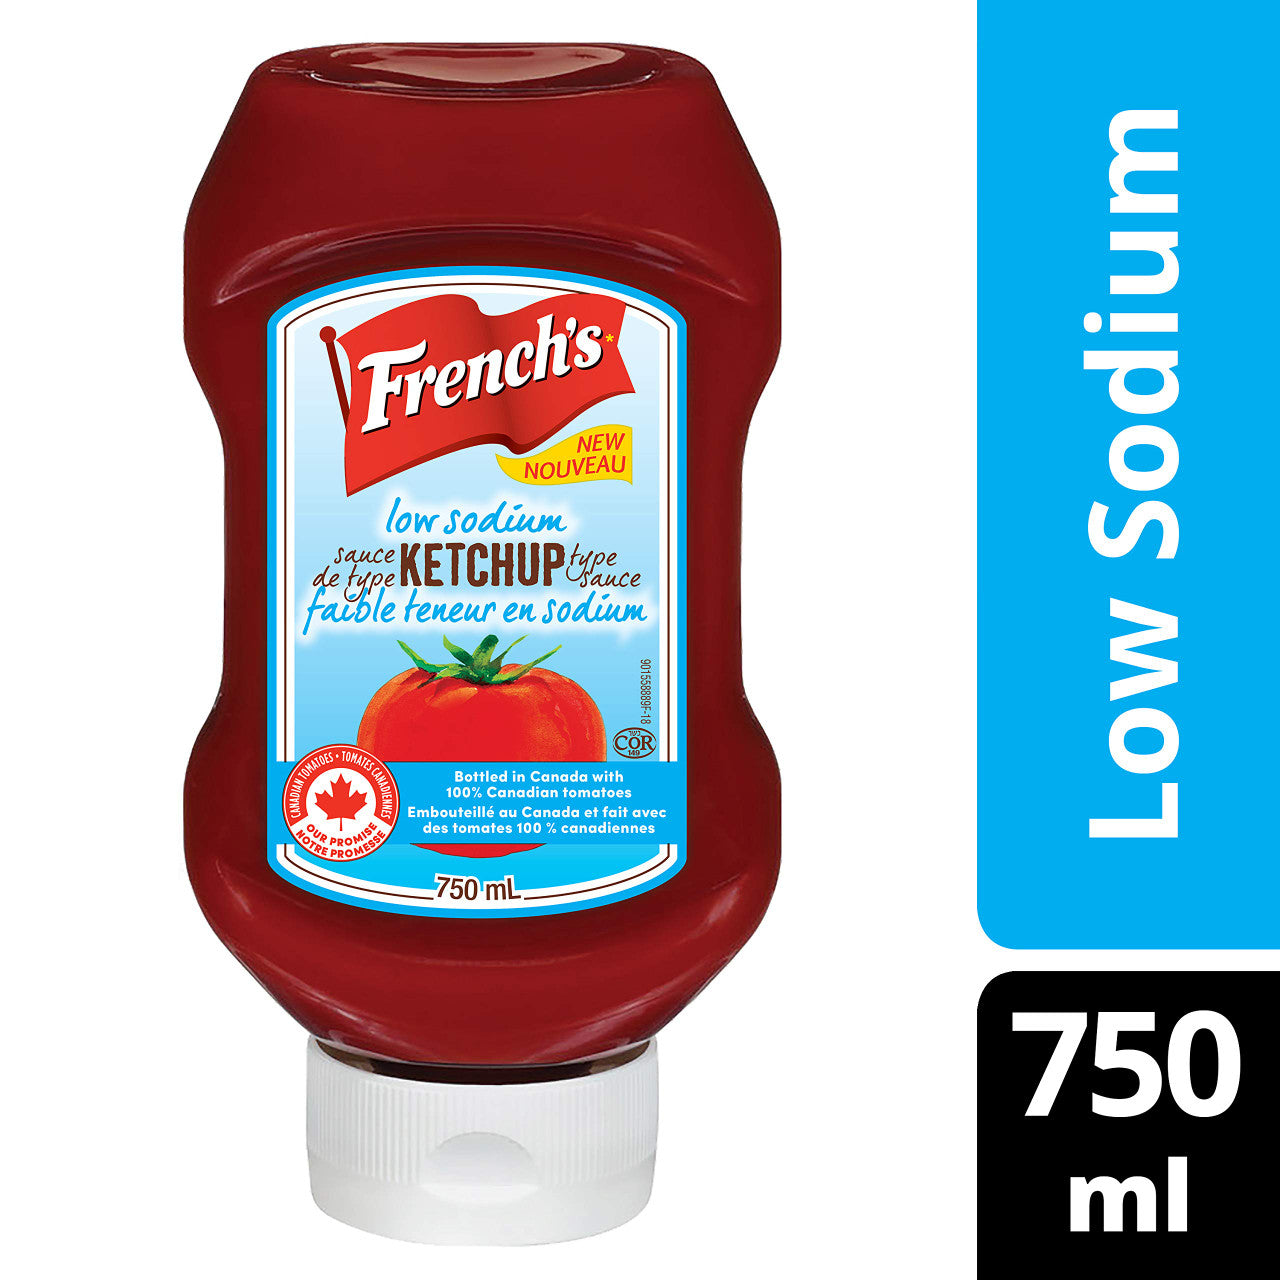 French's, Tomato Ketchup, Low Sodium, 750ml/25.4oz. (Imported from Canada)